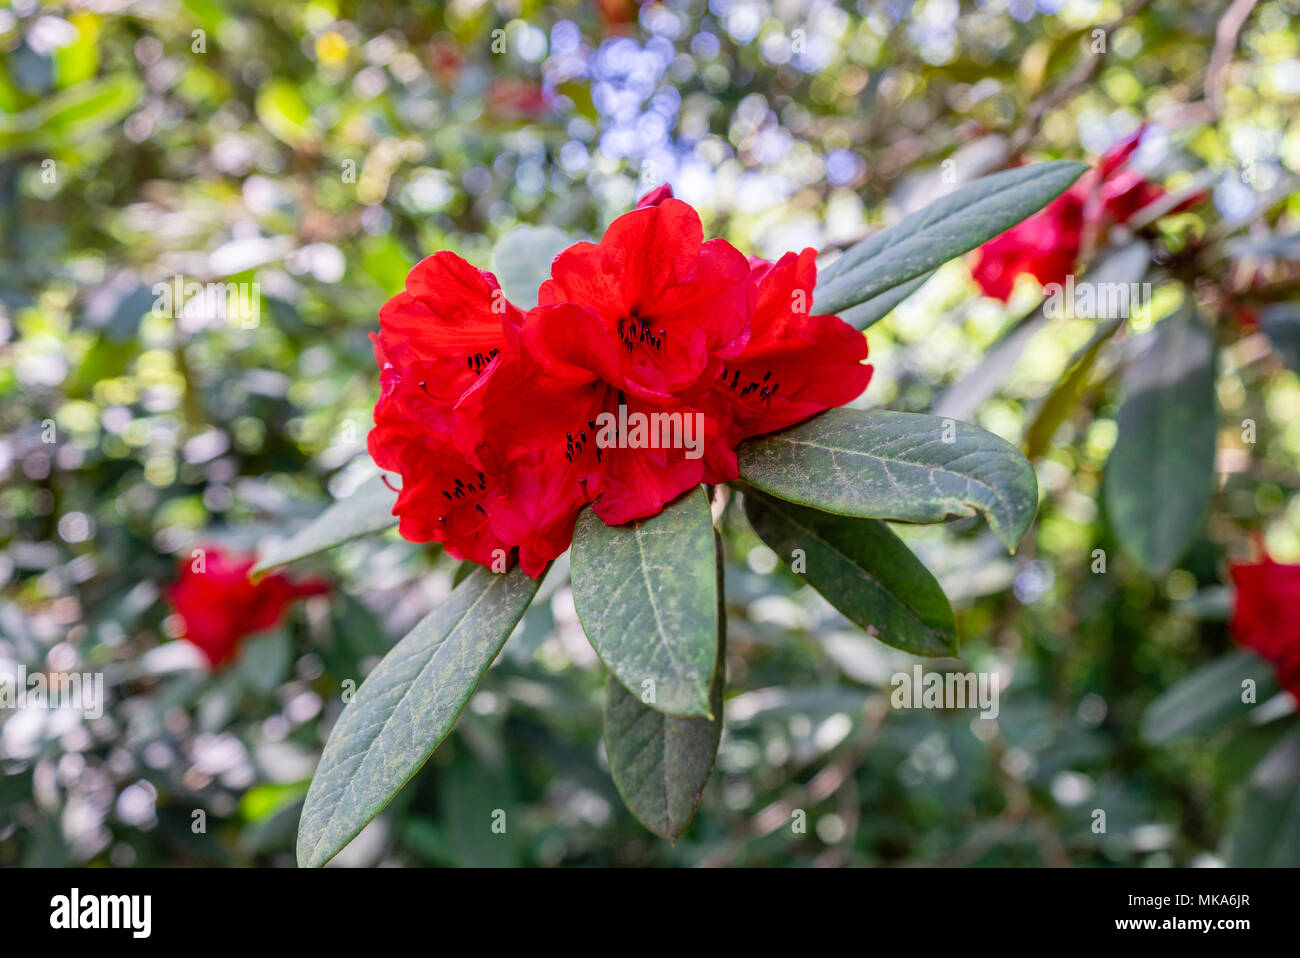 Red flower trusses of a Rhododendron Taurus plant in a garden in Southern England during May/ spring, UK Stock Photo